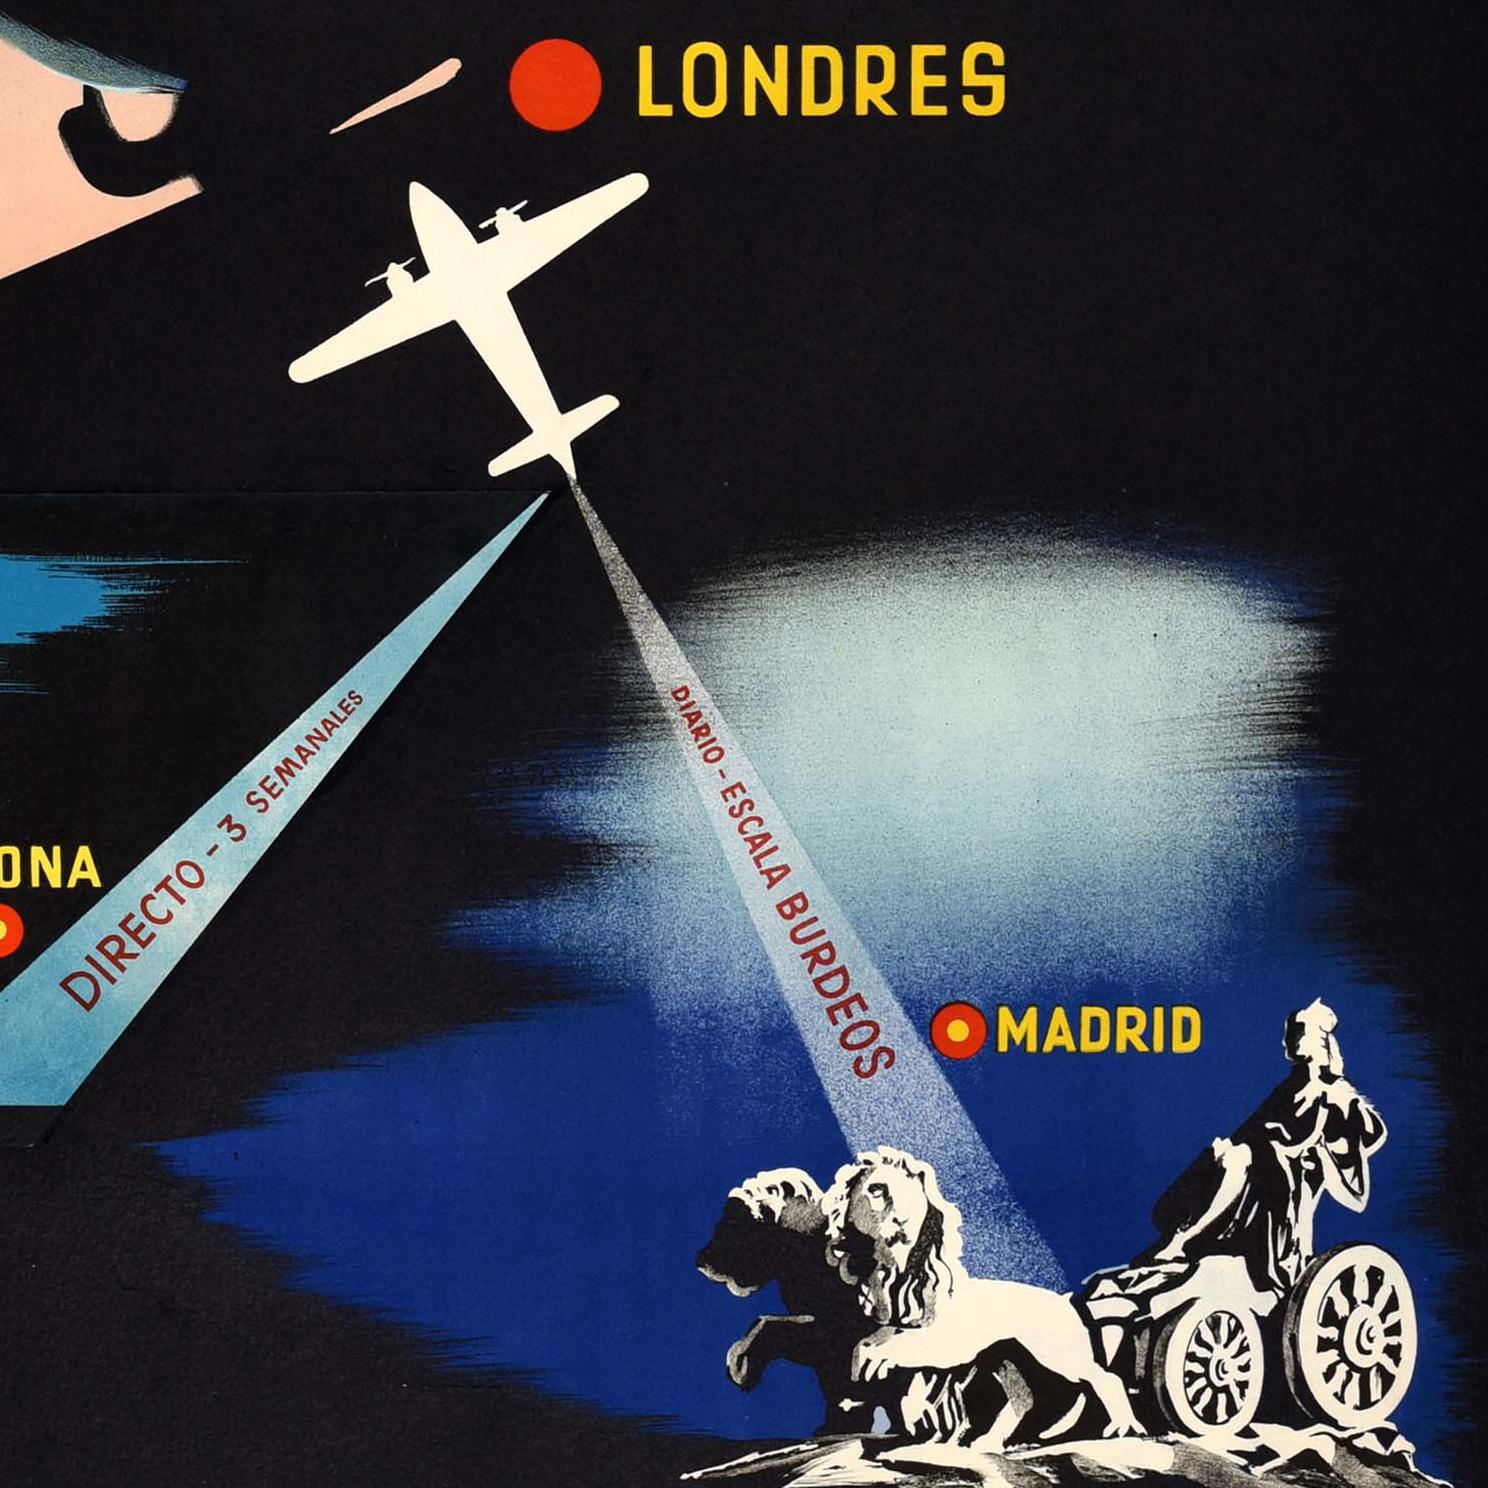 Original vintage travel advertising poster issued by BEA - Lineas Aereas Britanicas - featuring a stunning design showing a plane flying from Madrid in Spain to Londres / London in England marked with red dots and showing sculptures from the two